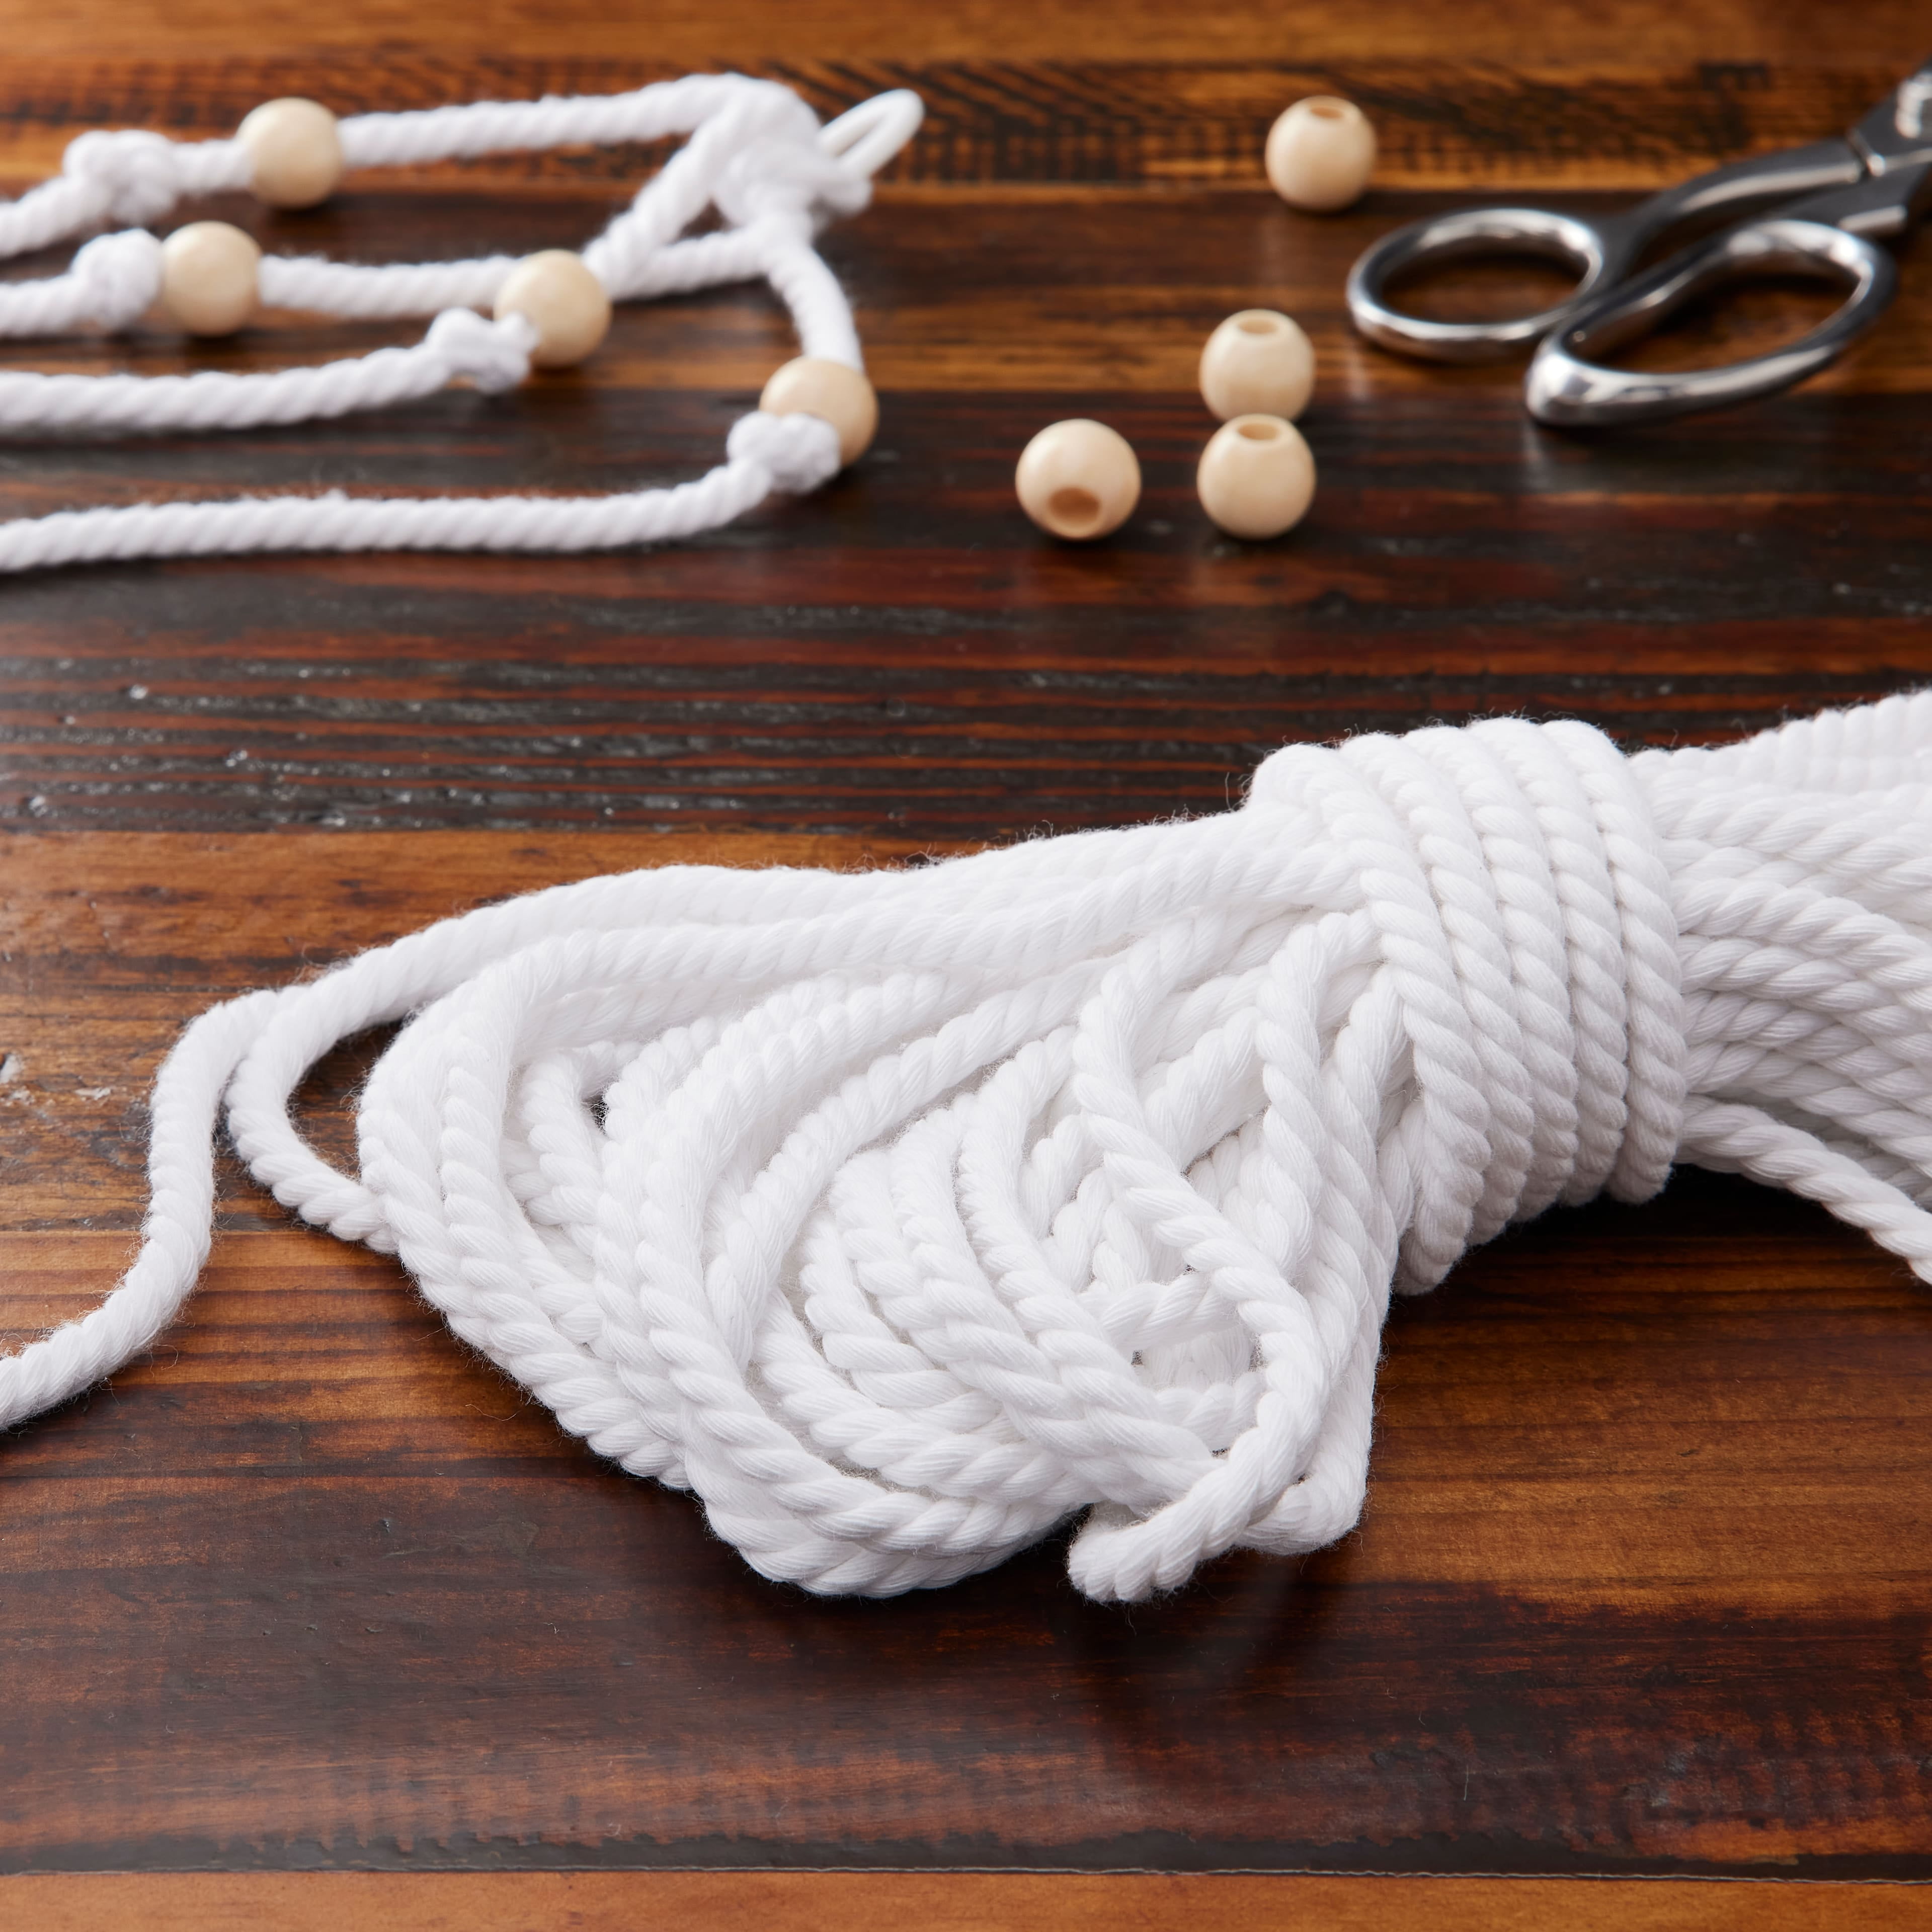 12 Pack: Macramé Cotton Cord by Loops & Threads®, 25yd. 